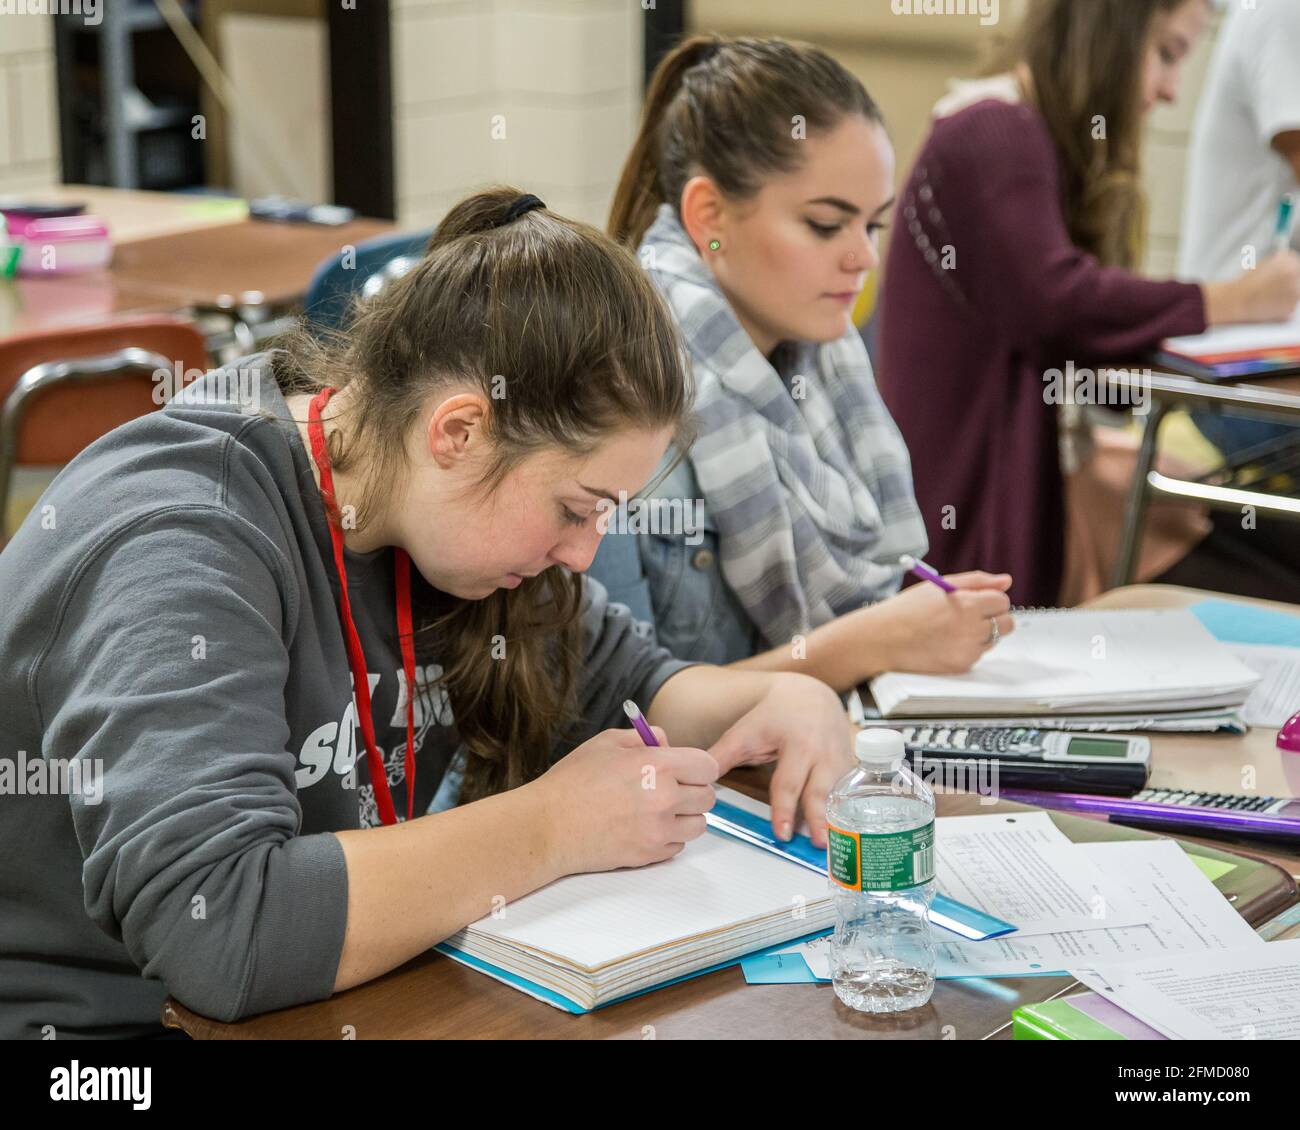 High school students working together in the classroom Stock Photo